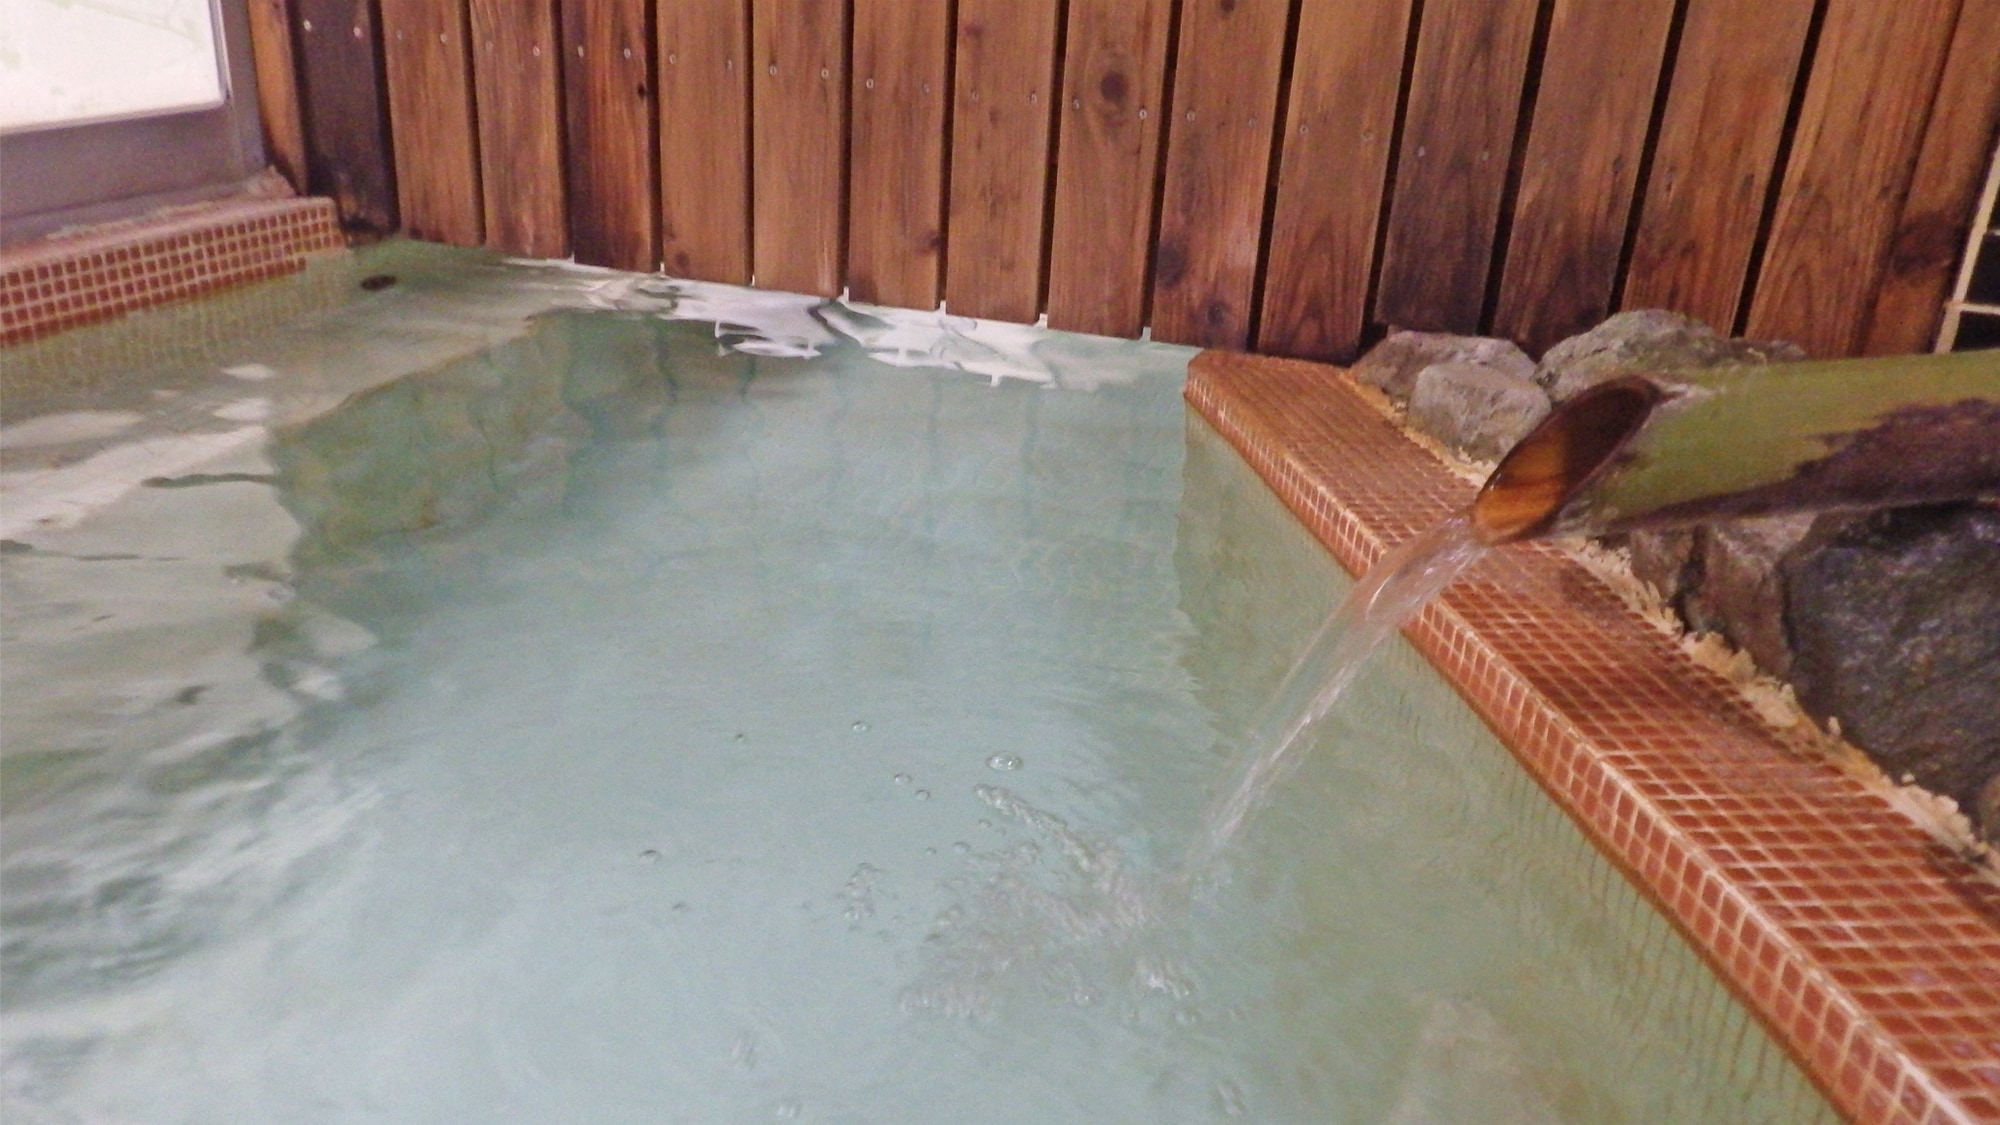 *Large communal bath/hot spring water is flowing directly from the source. The water temperature is kept lukewarm so that you can take it slowly.